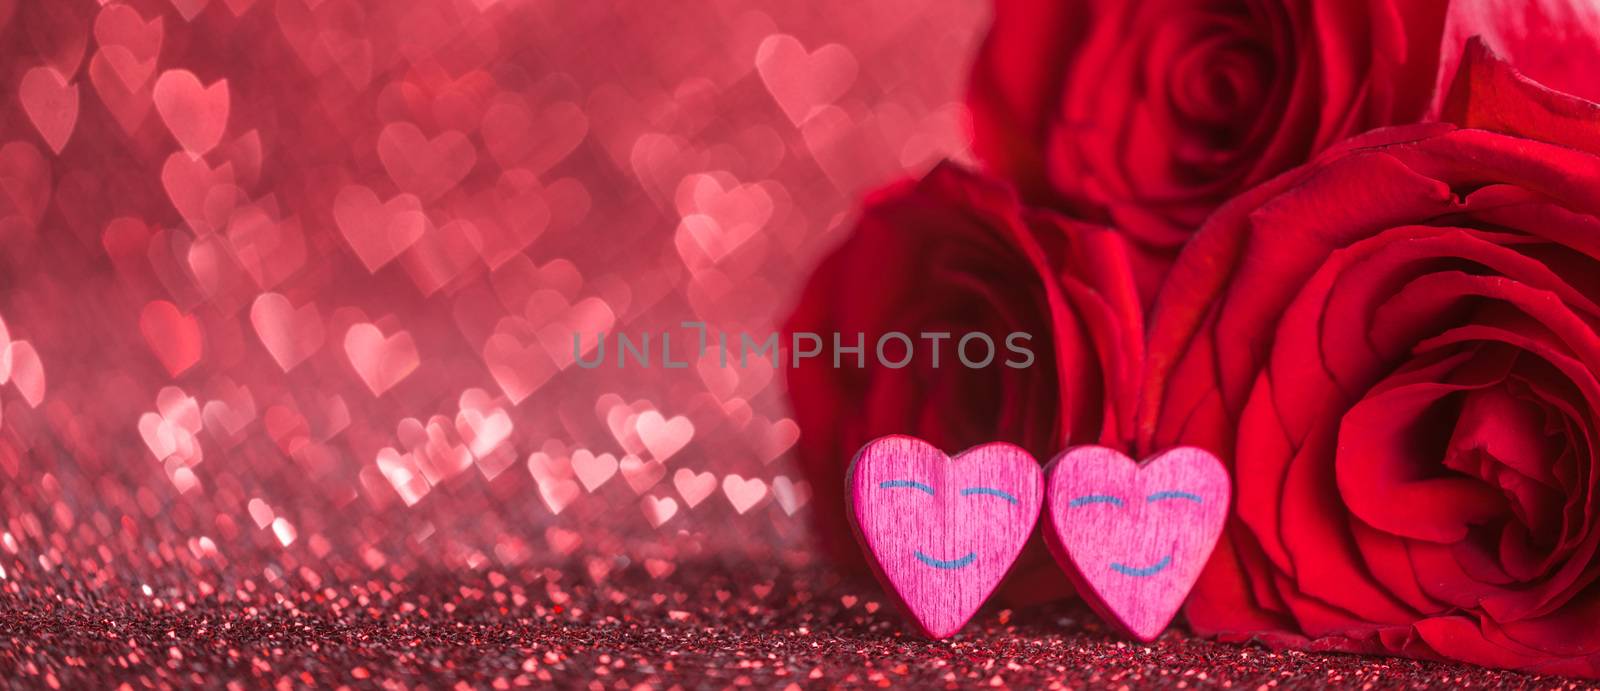 Roses and hearts on red glowing bokeh hearts background for Valentines day